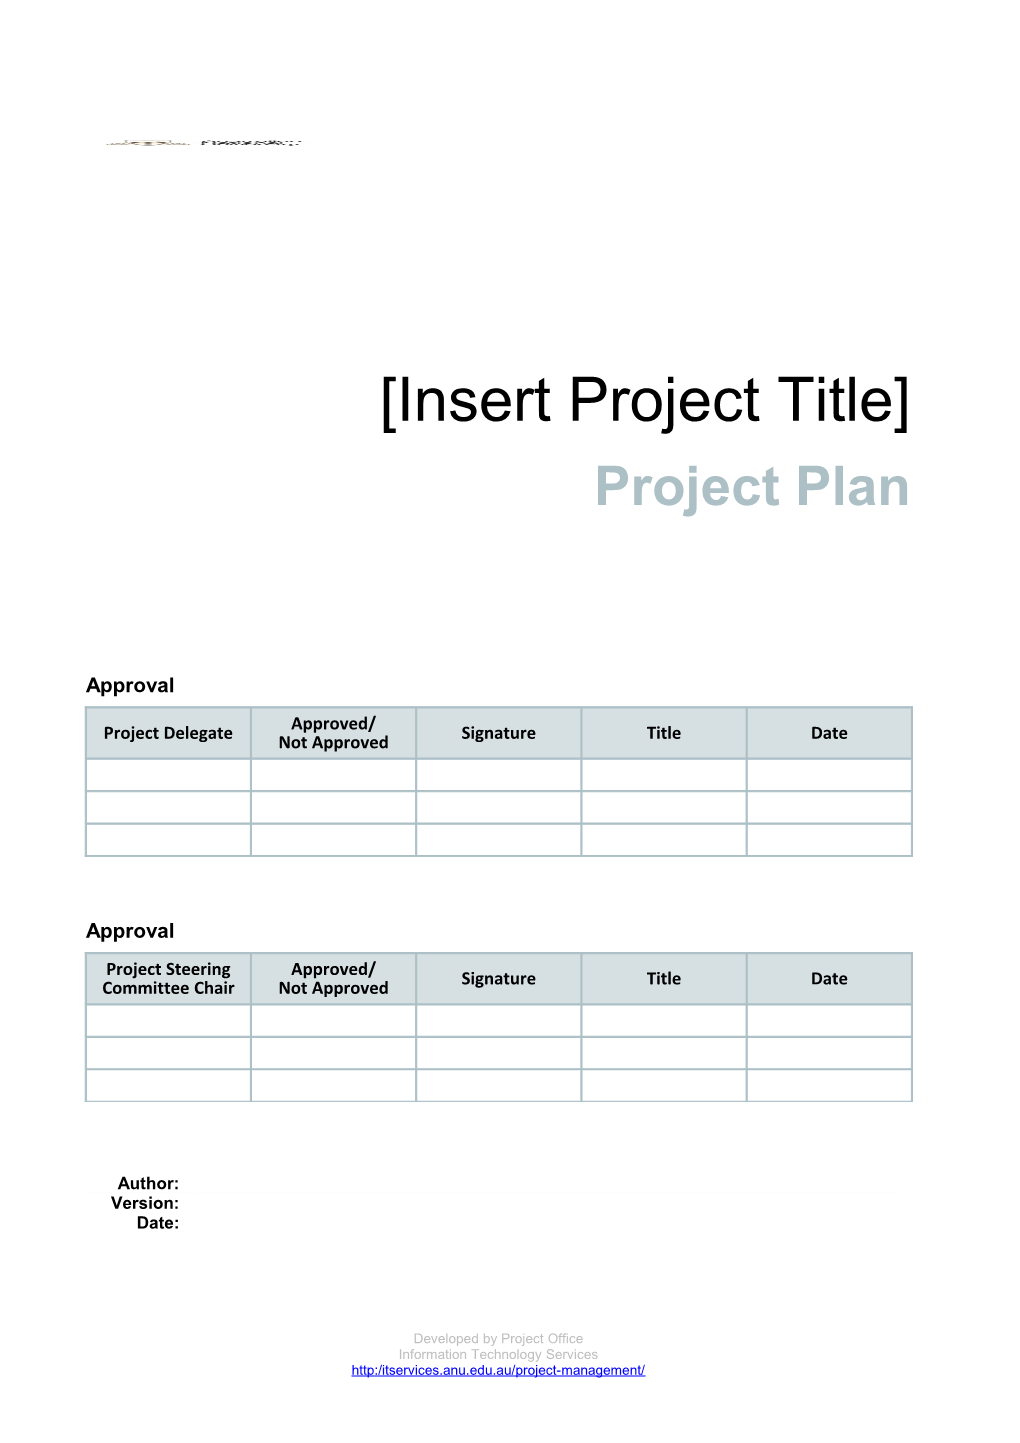 LARGE PROJECT PLAN Insert Project Title